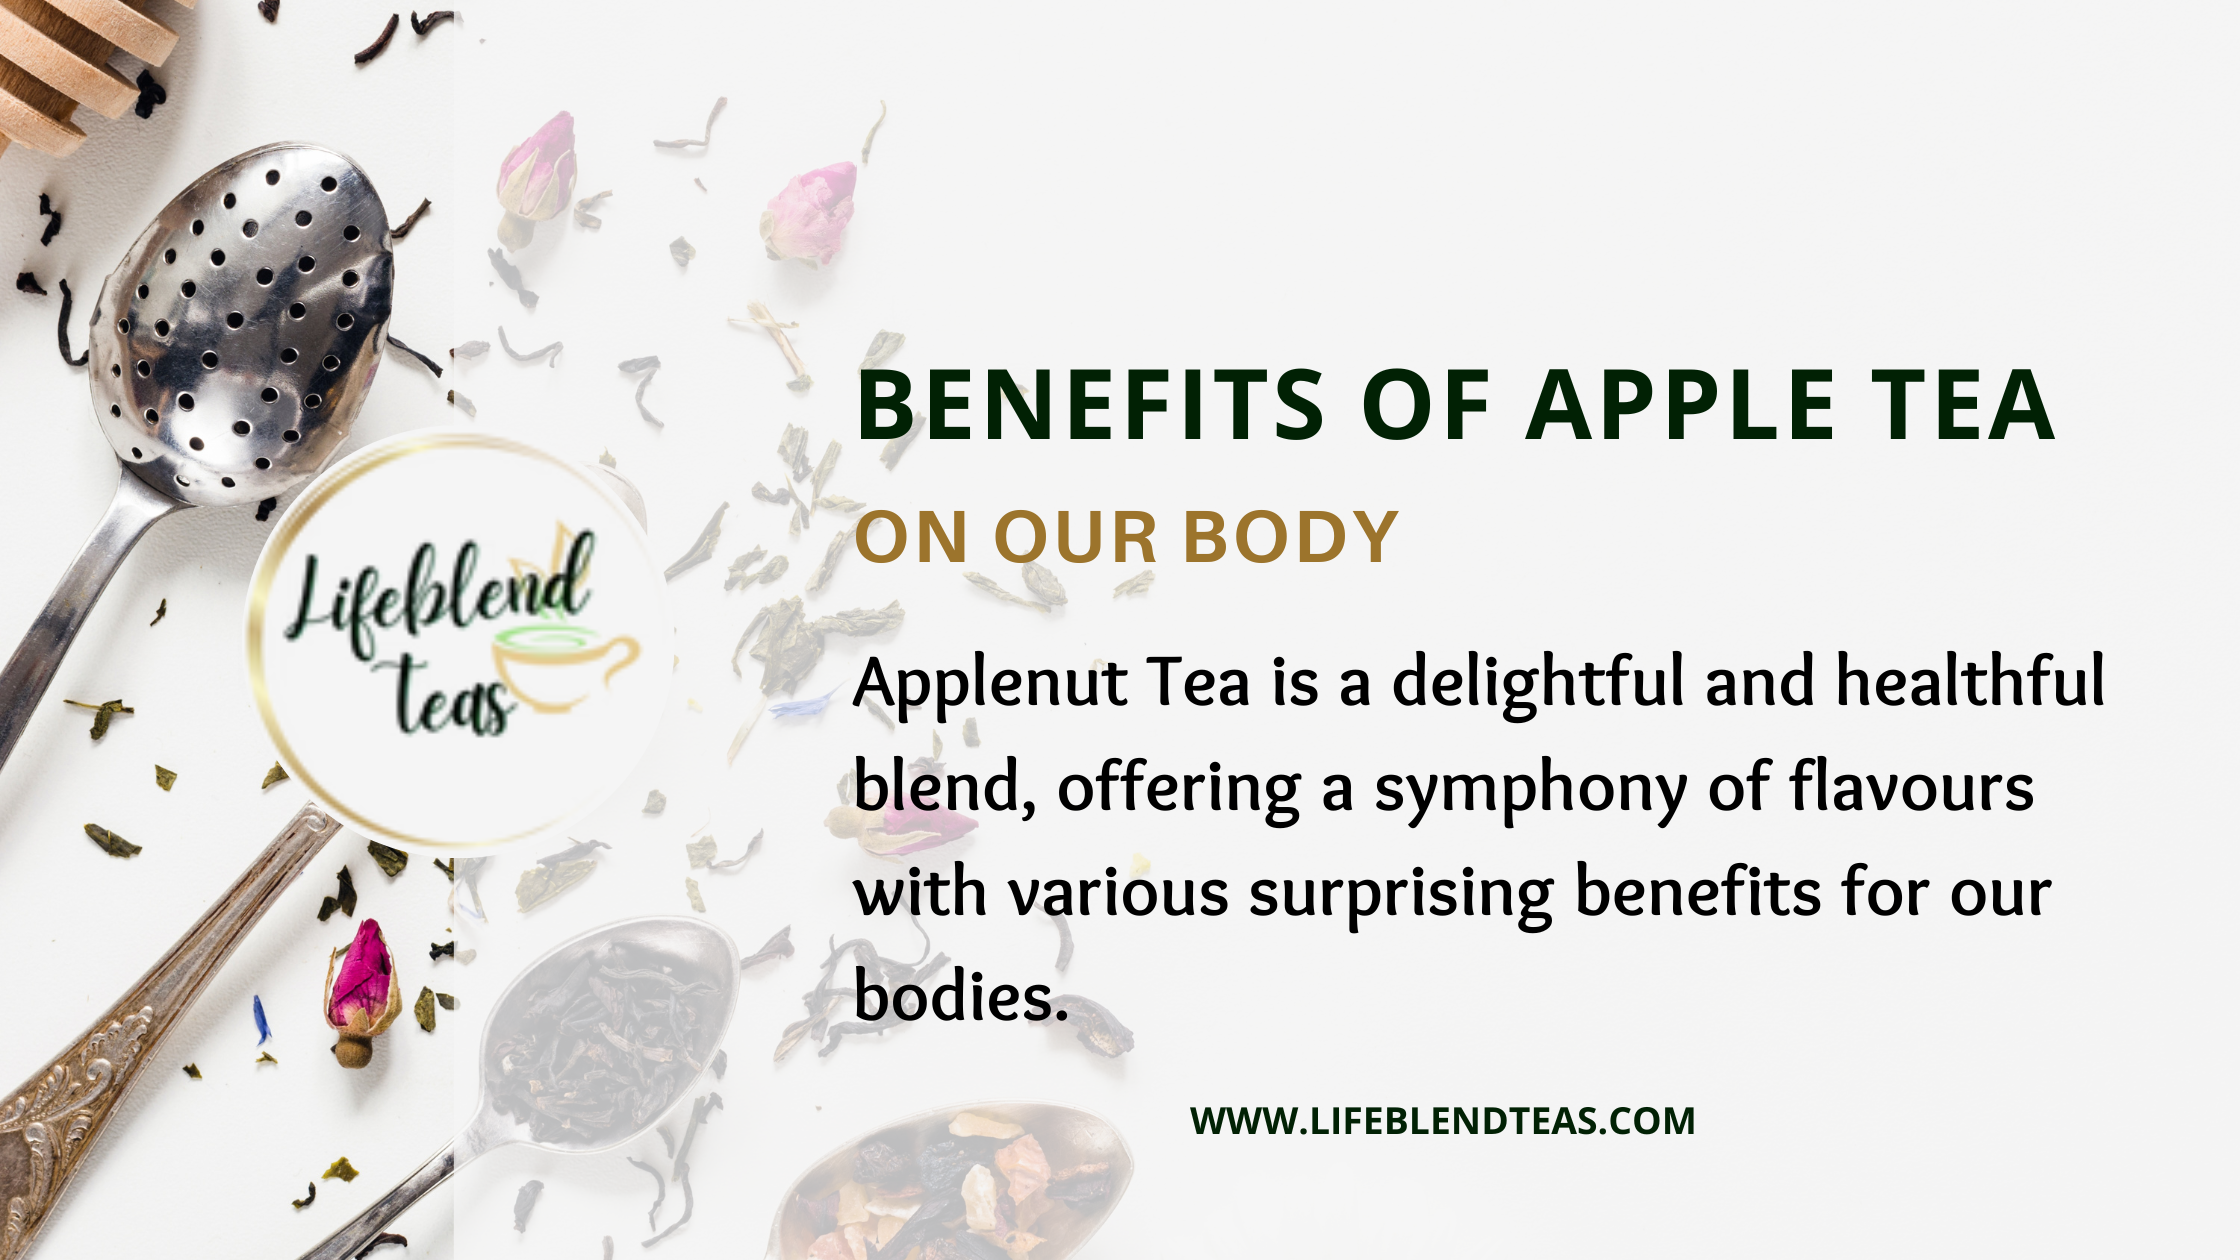 8 Surprising Benefits of Applenut Tea on Our Body